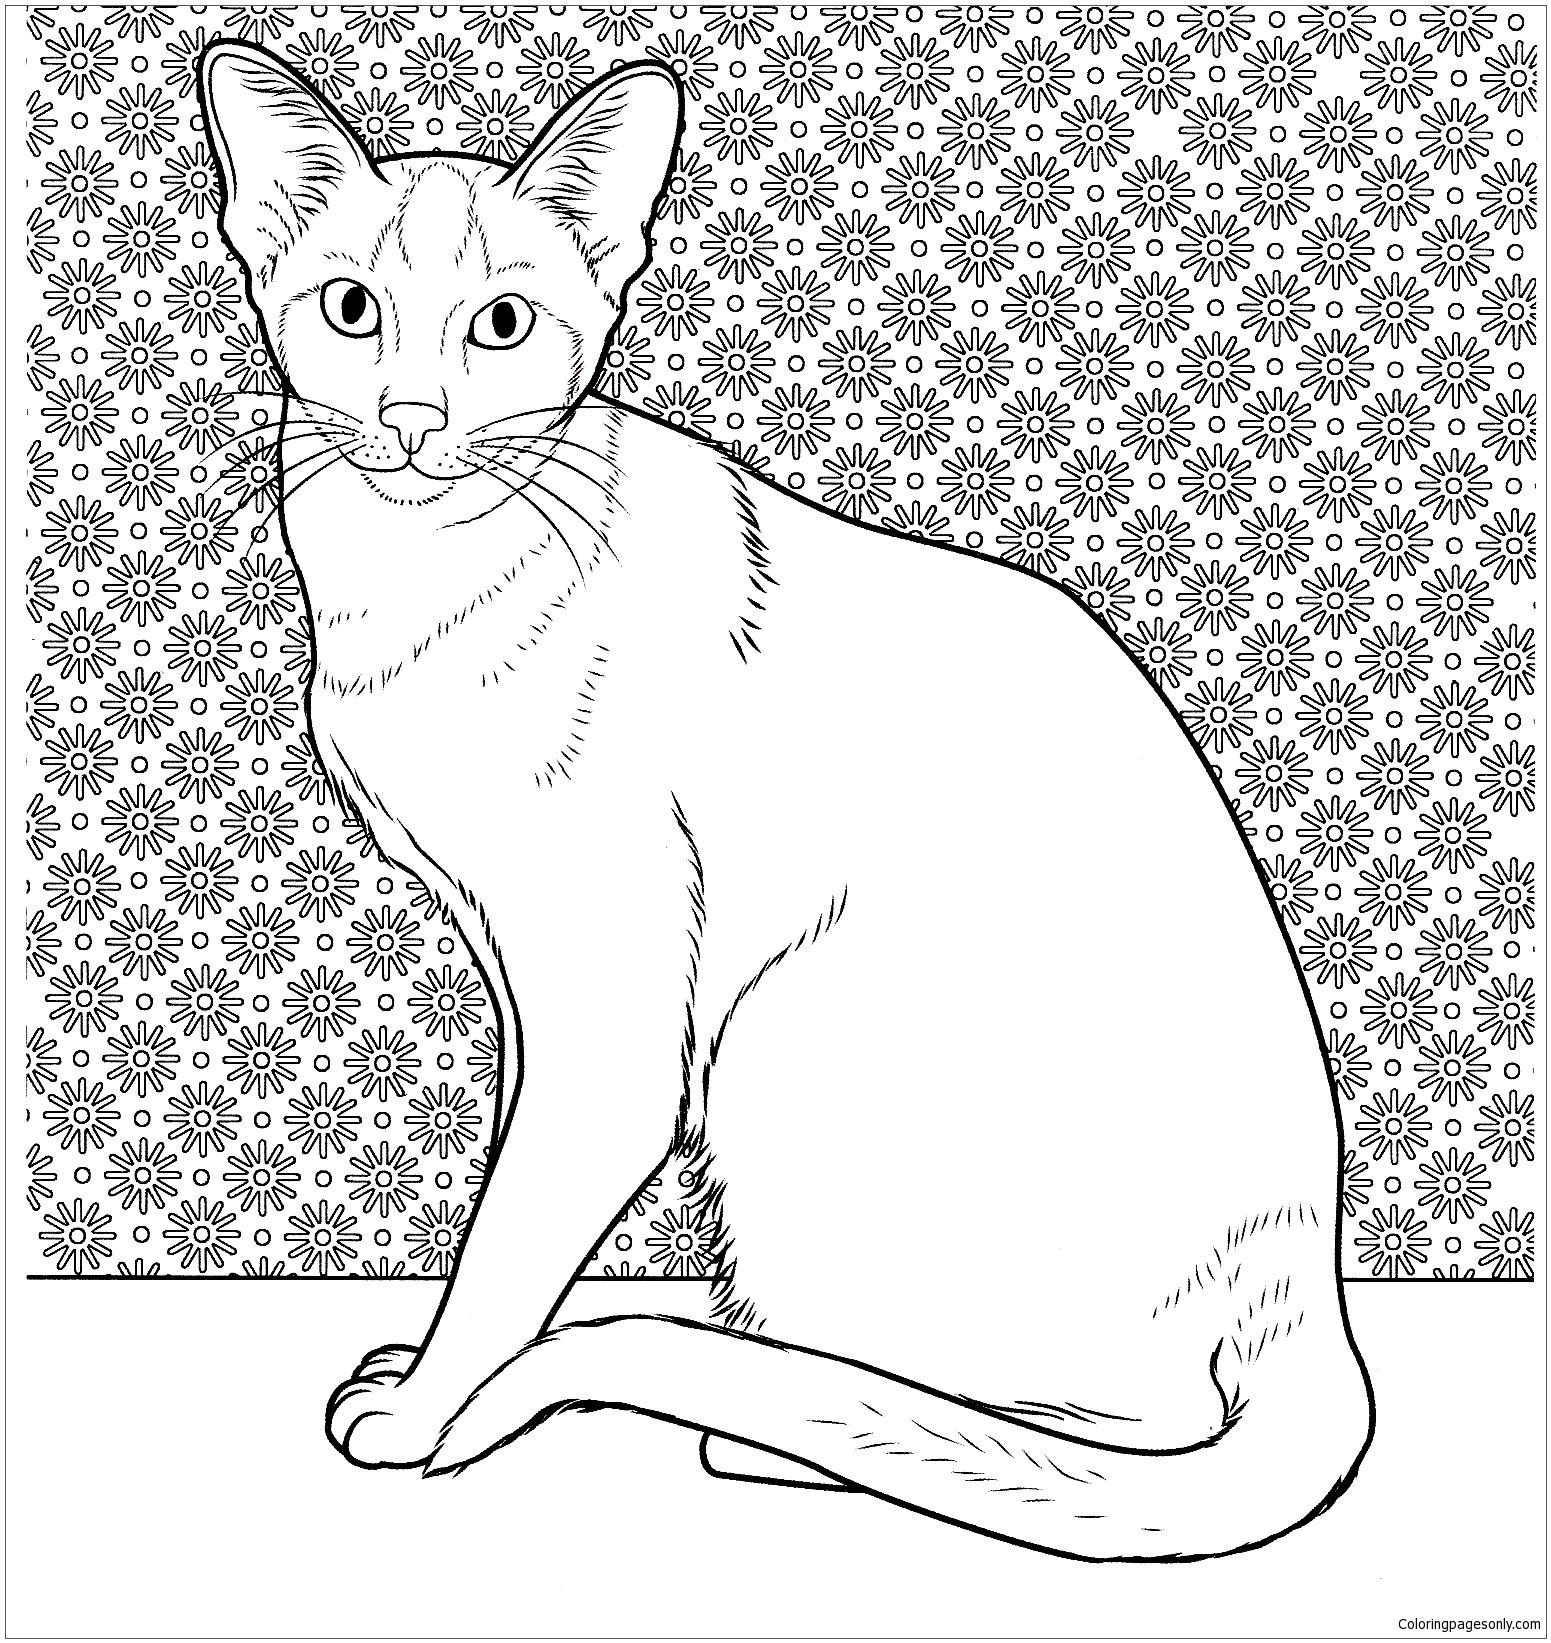 Oriental Siamese Cat Coloring Page - Free Coloring Pages Online